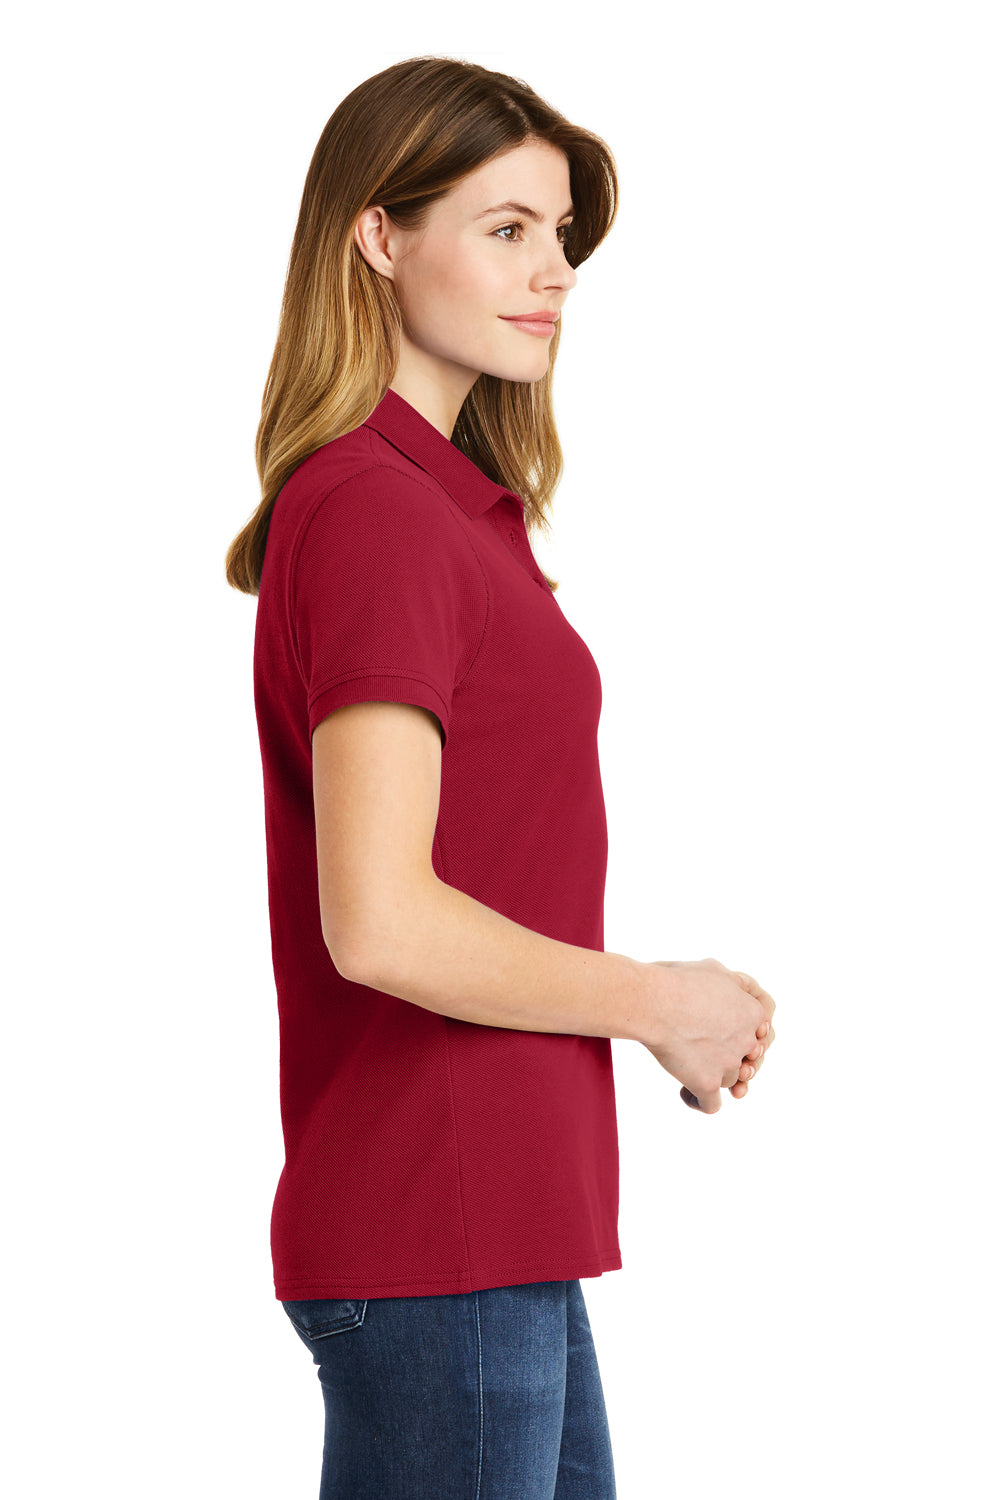 Port & Company LKP1500 Womens Stain Resistant Short Sleeve Polo Shirt Red Side